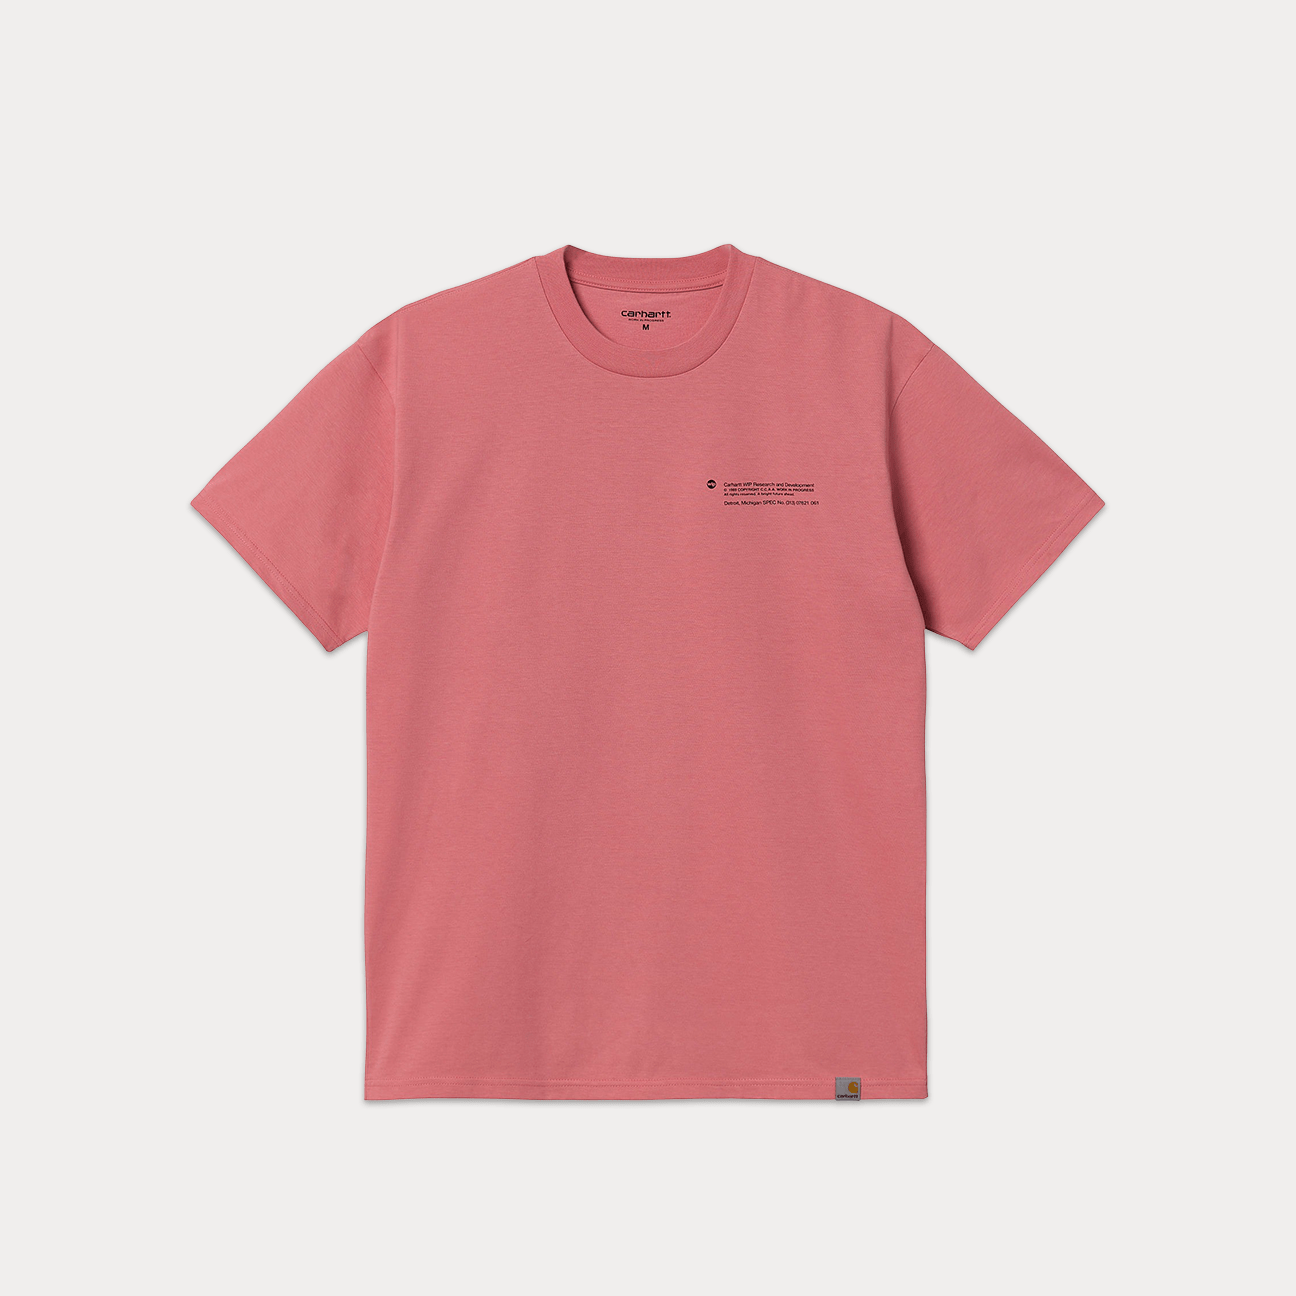 CARHARTT T-Shirt Structures Rotho Pink